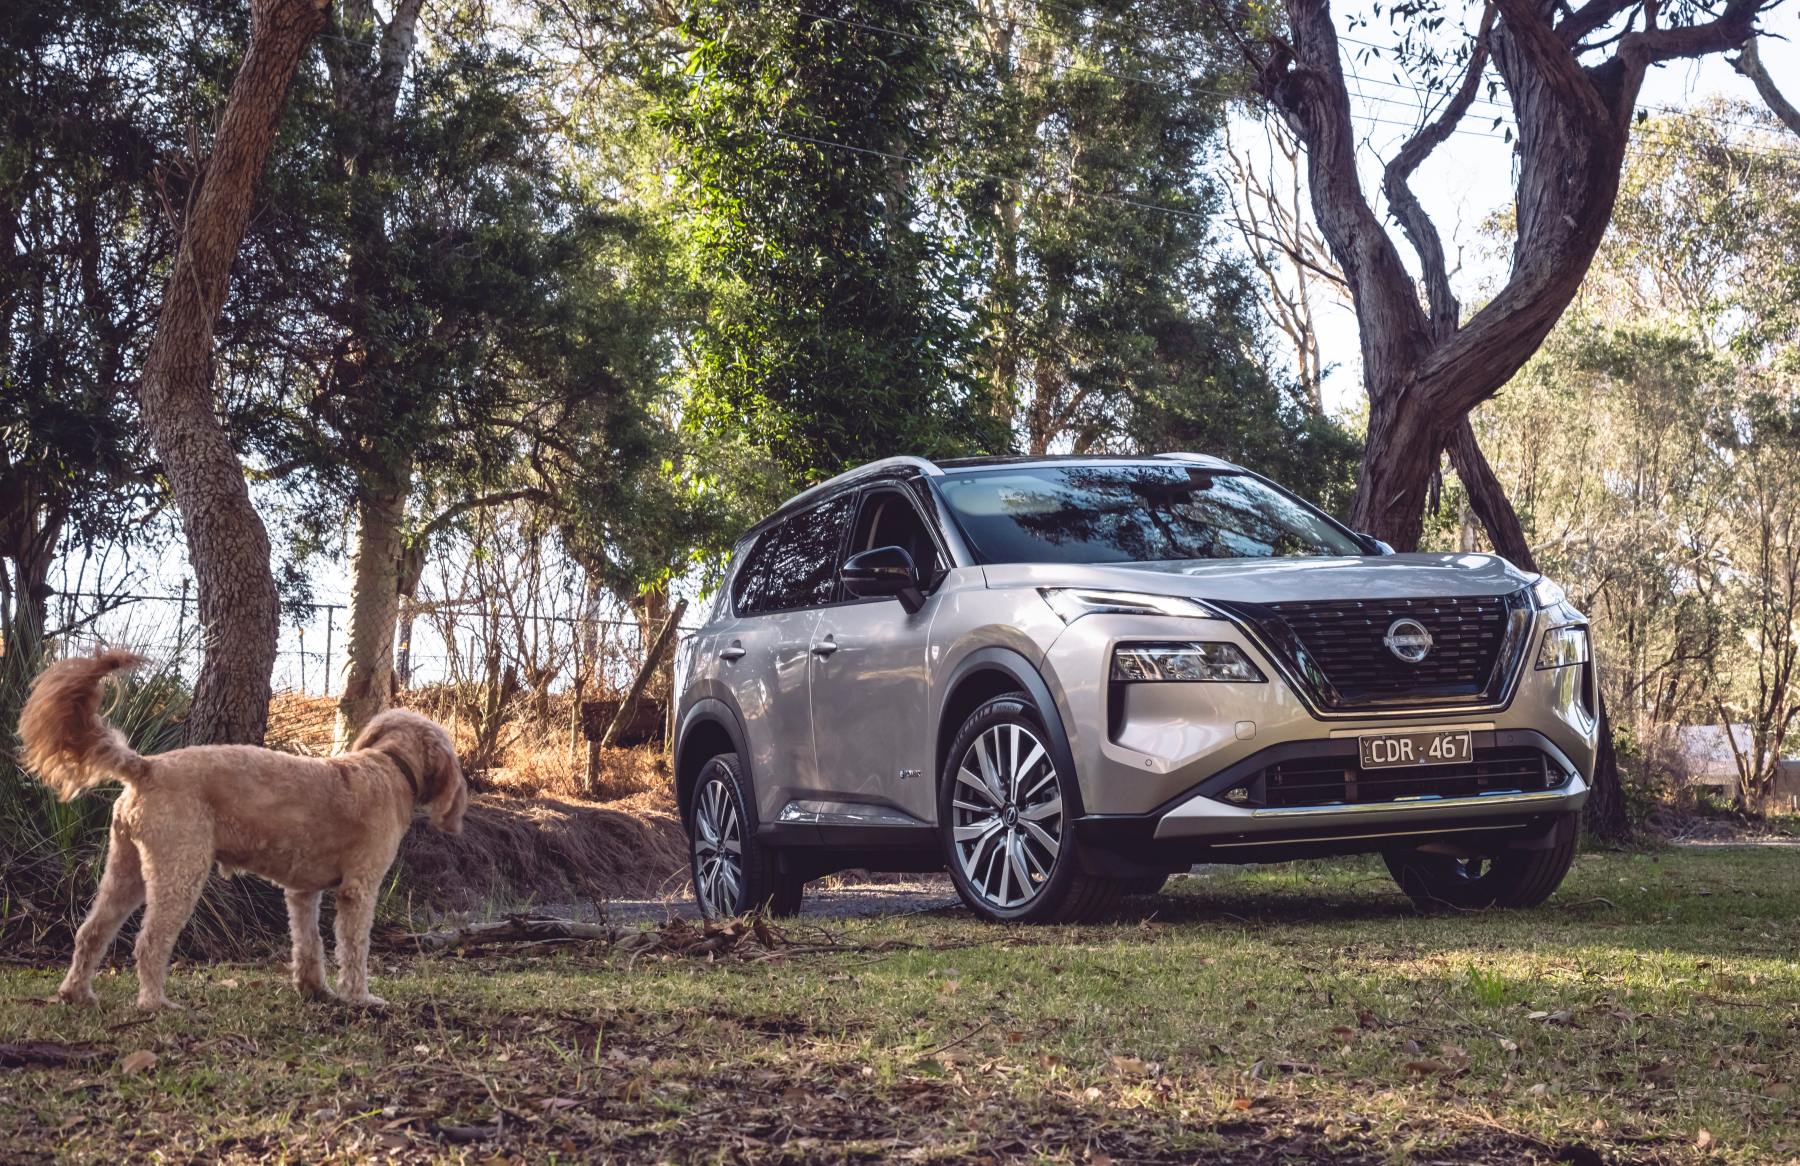 Nissan DOG ACCESSORIES X-trail e4orce 3